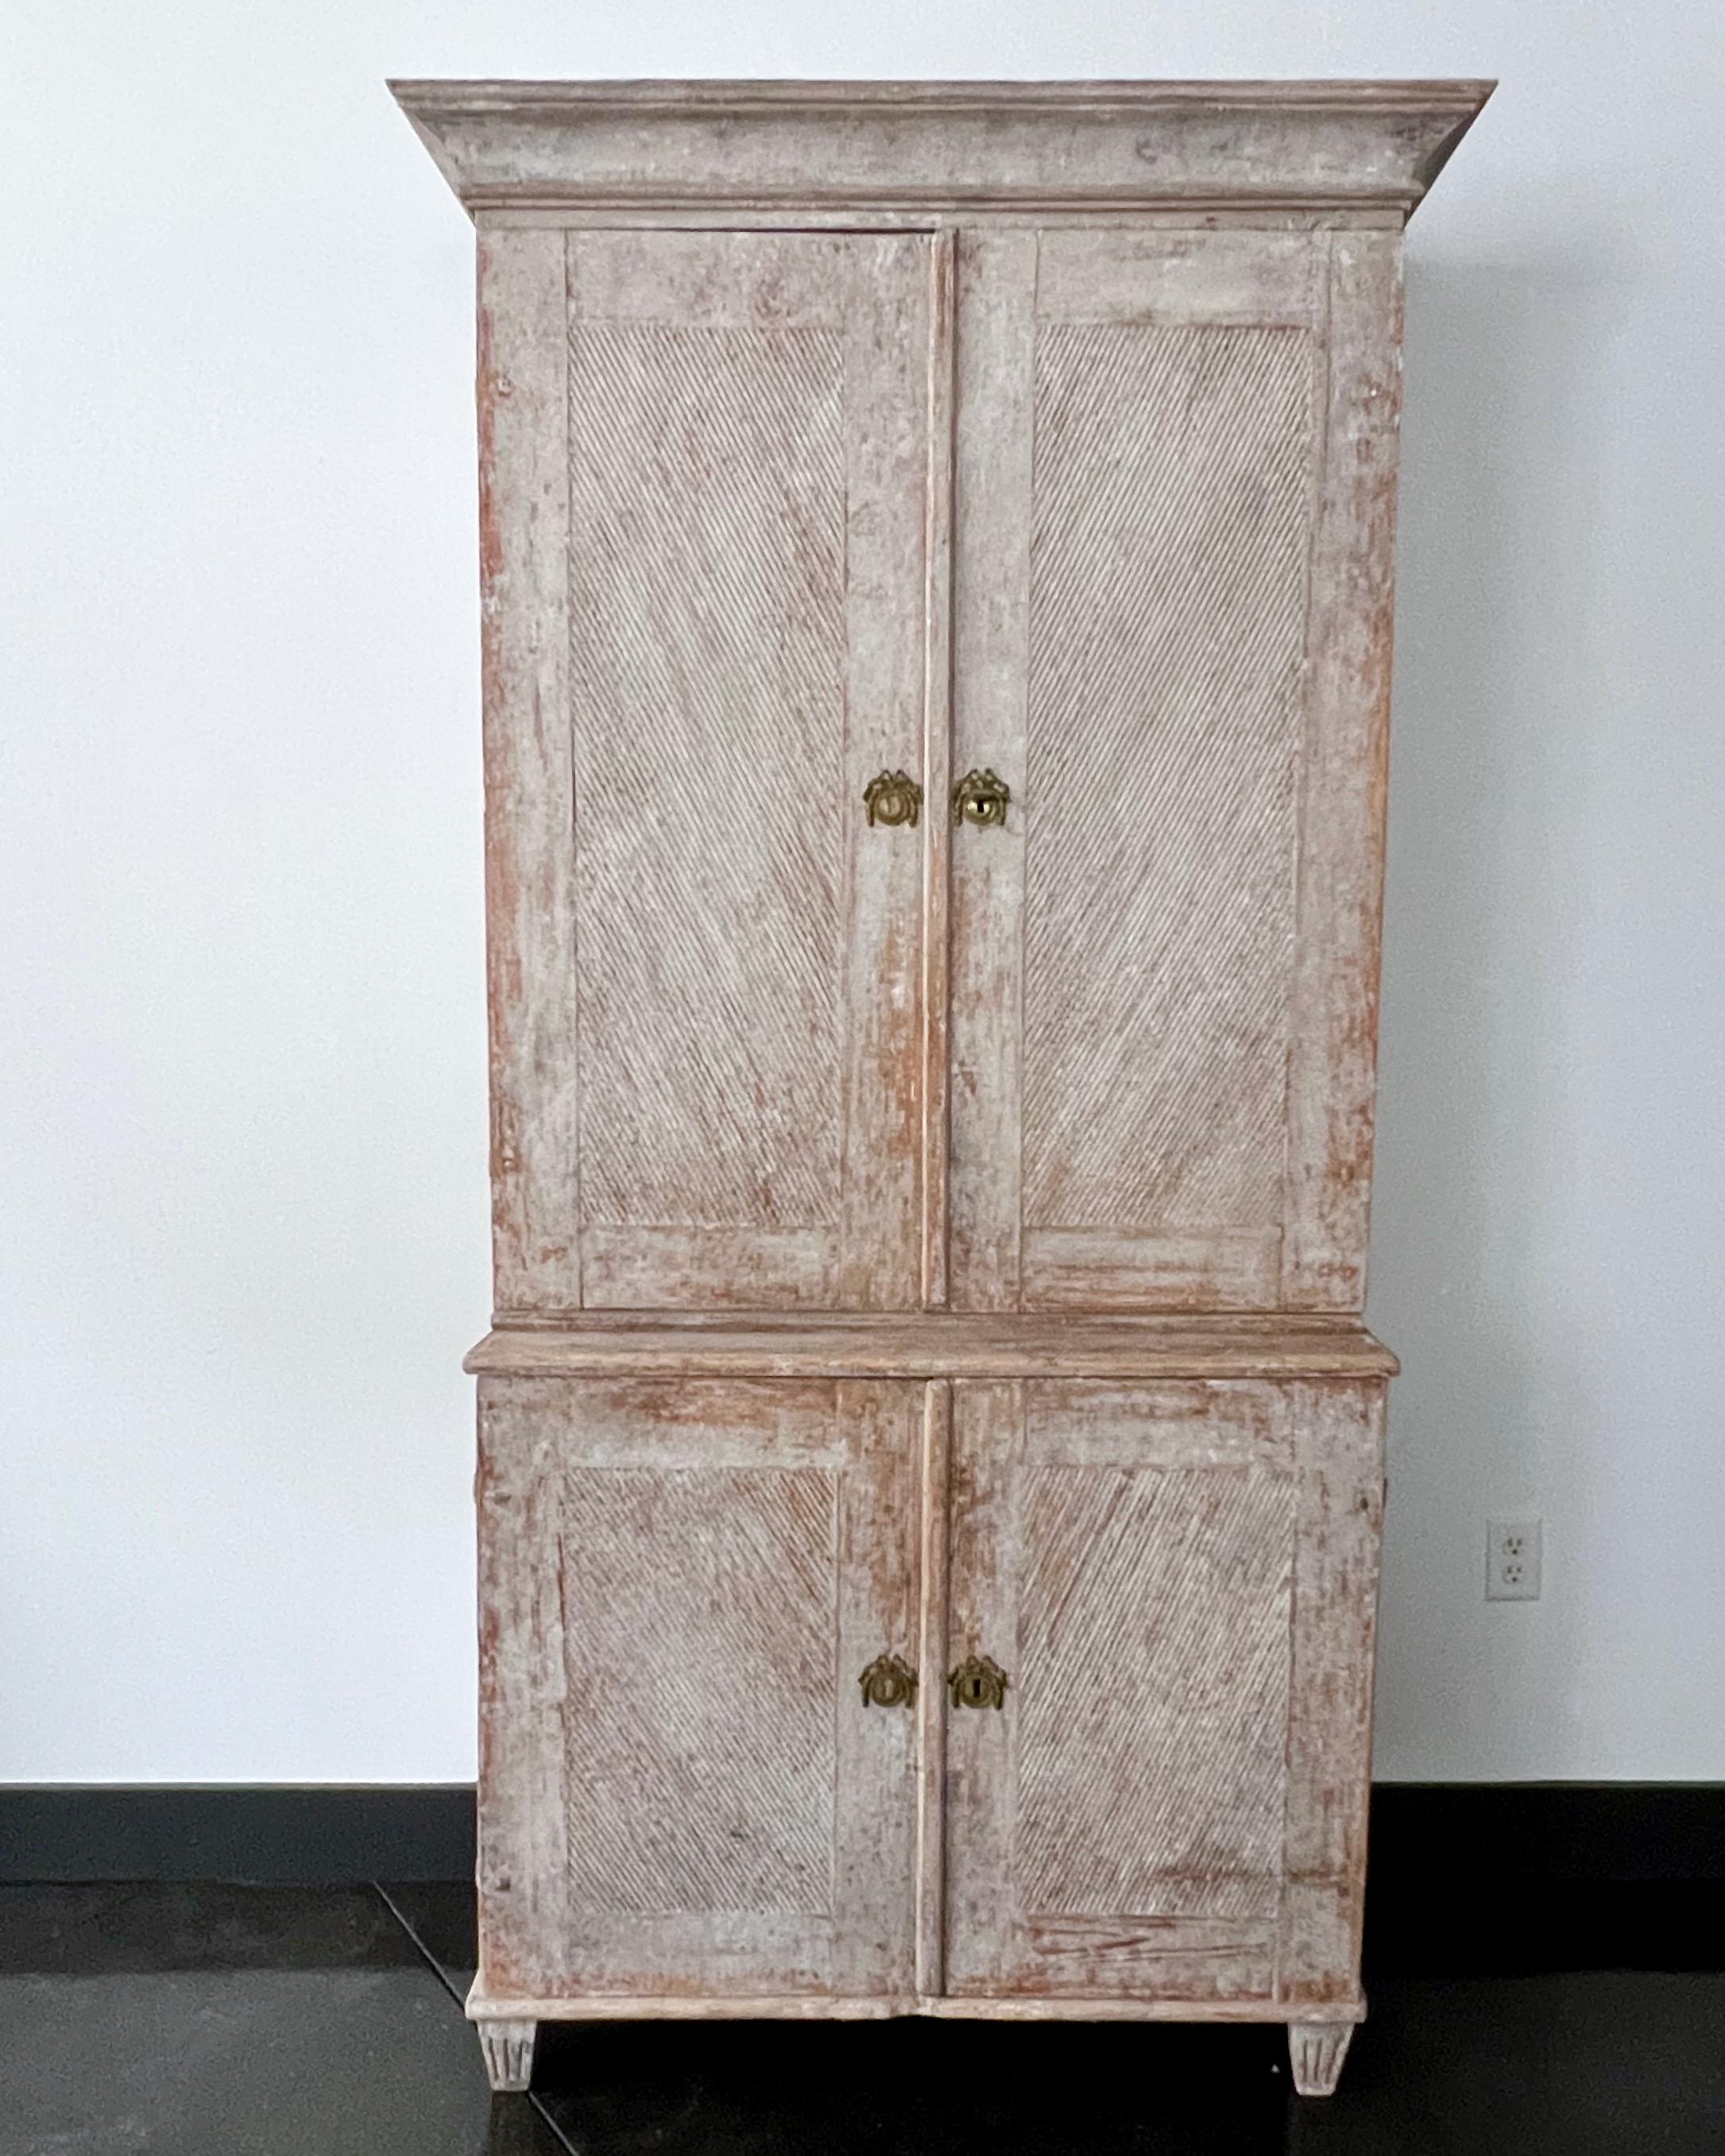 18th century Swedish Gustavian painted cupboard with richly carved unusual angled reeded door panels with beautiful bronze fittings and simple cornice. Lot of storage with inside wider and smaller selves. All in lovely pale gray patina.